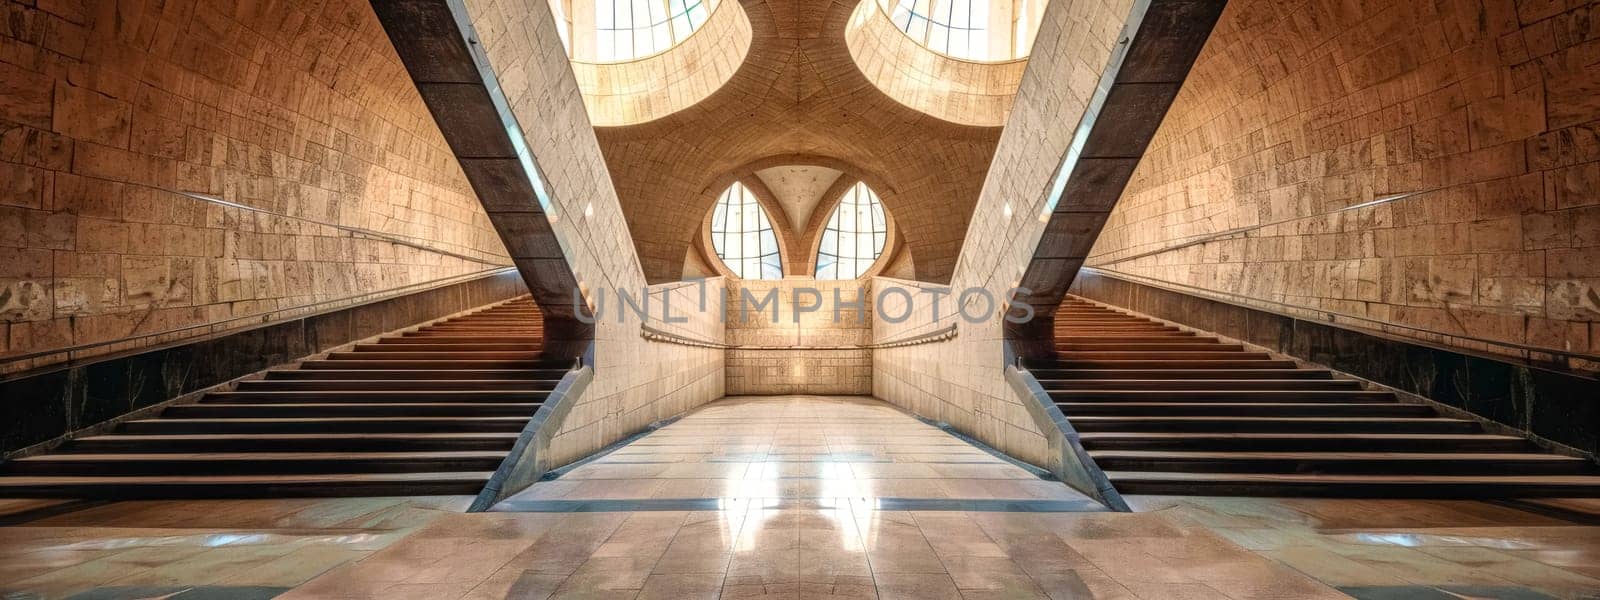 Symmetrical grand staircase in modern building by Edophoto